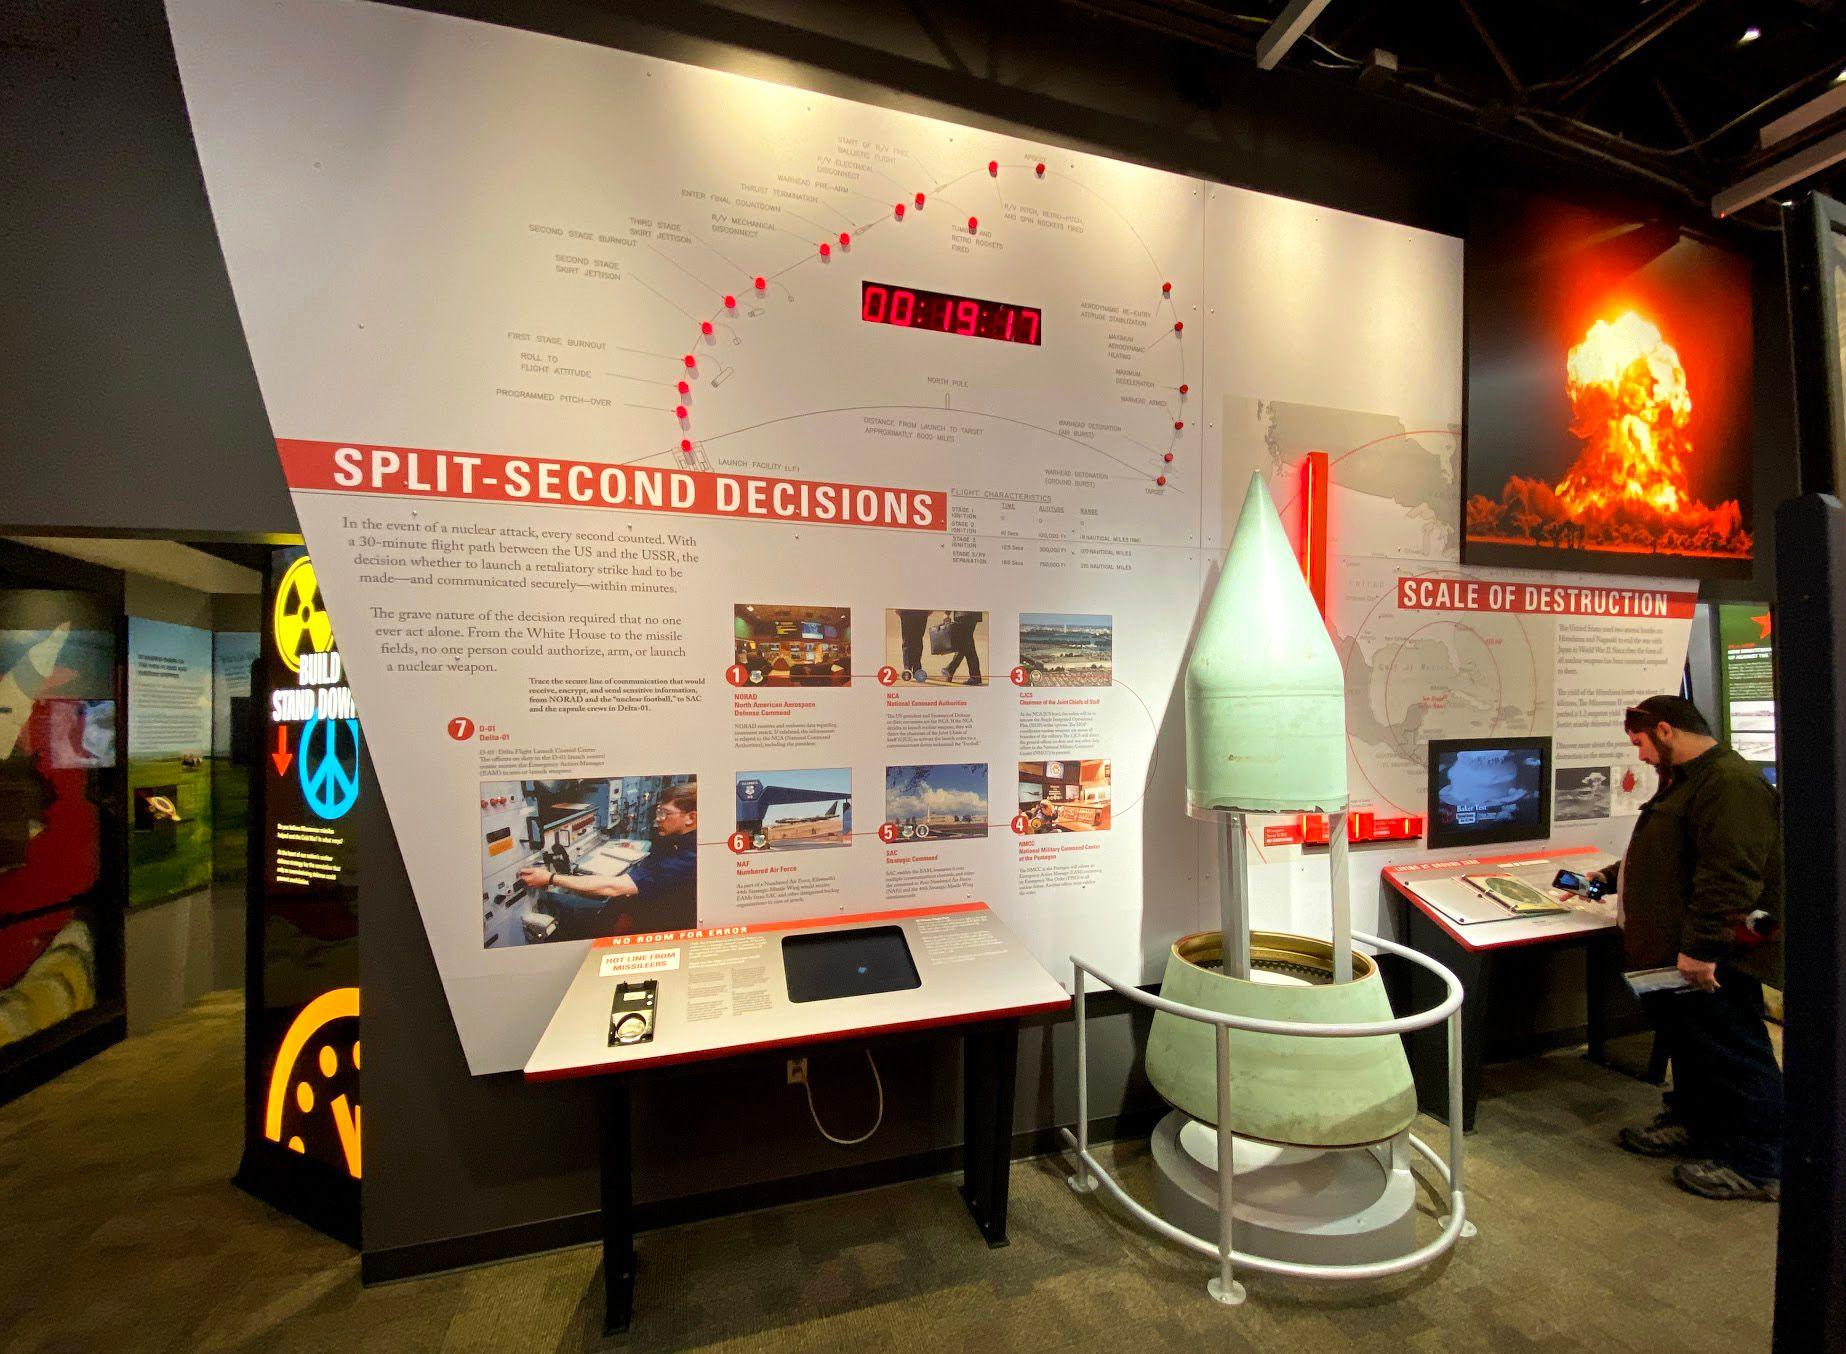 An exhibit inside the Minuteman Missile Museum about split-second decisions.